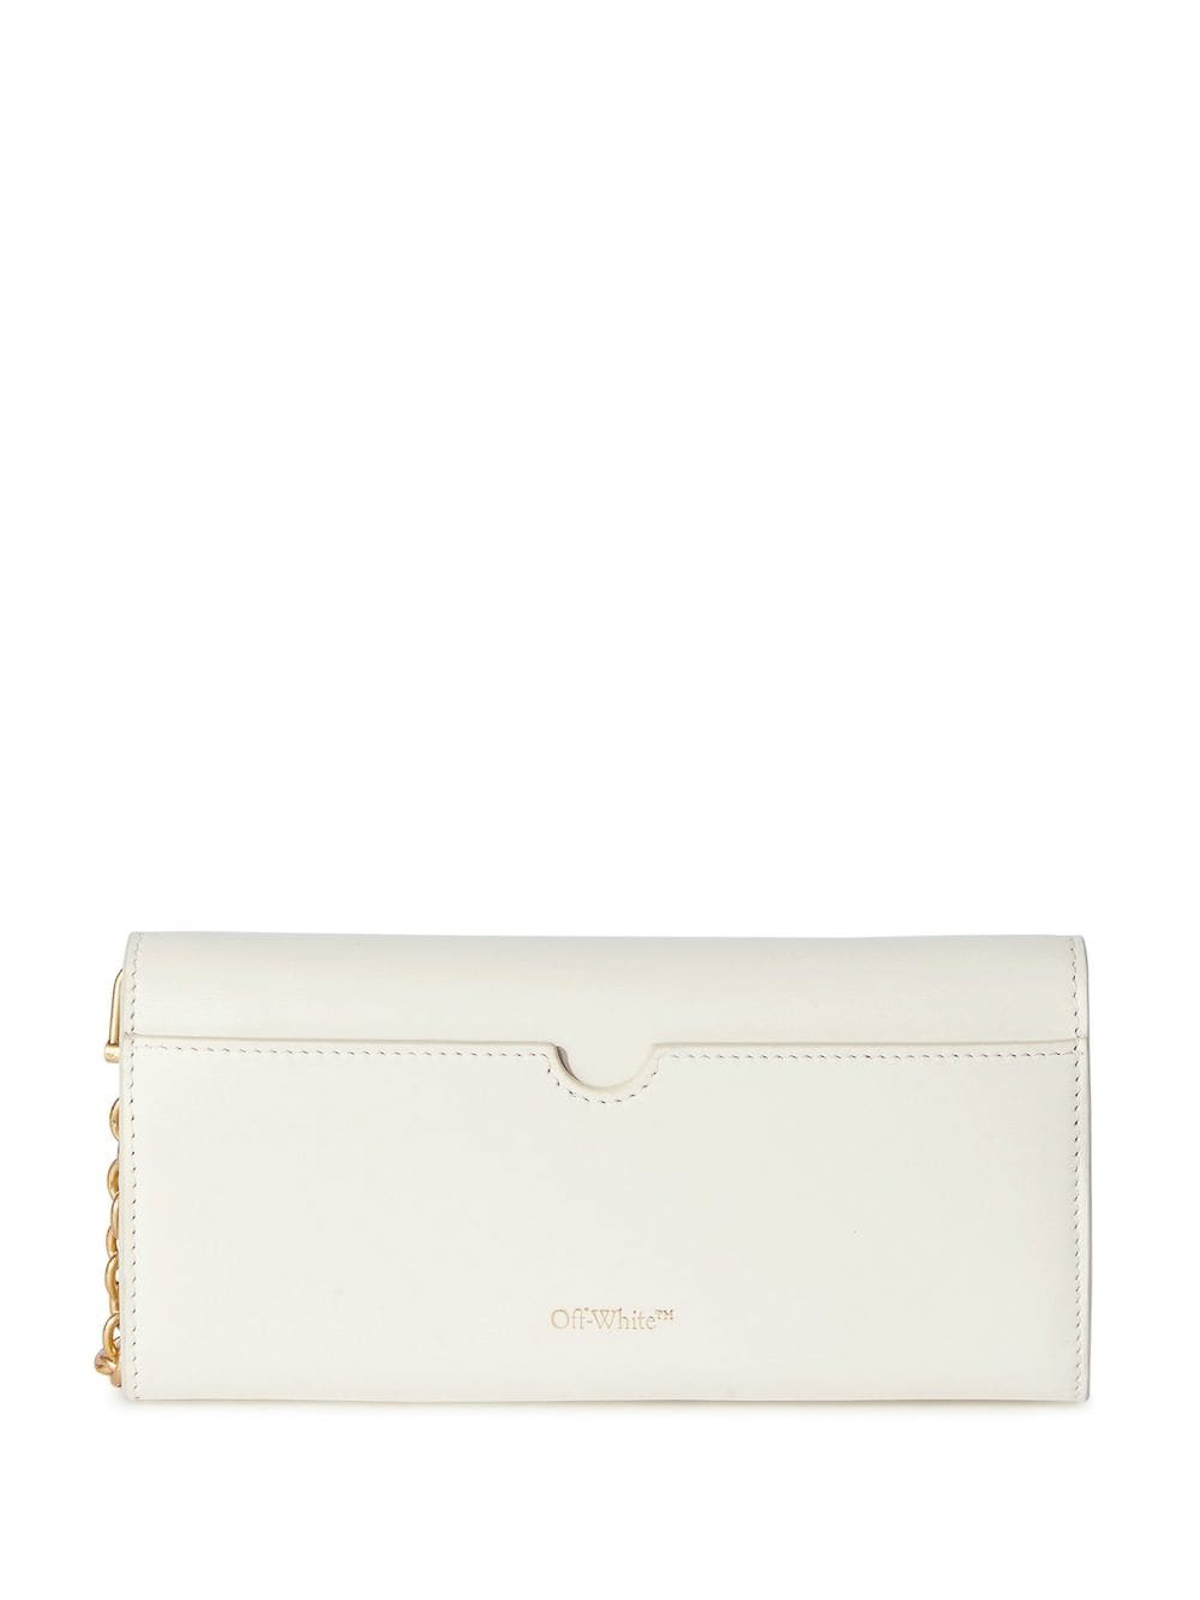 Jitney Printed Leather Card Holder in Black - Off White